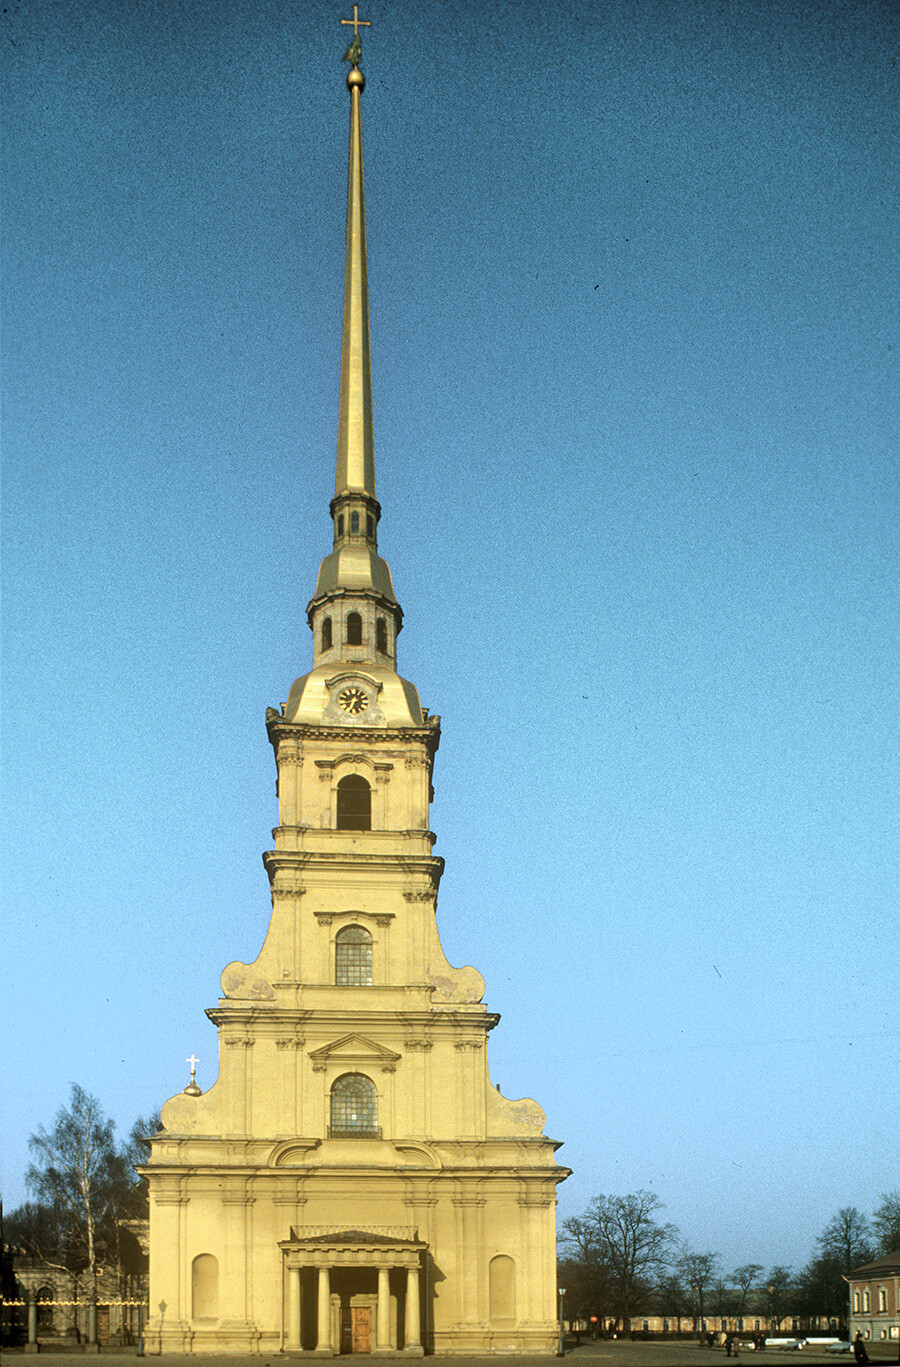  Peter-Paul Fortress. Cathedral of Sts. Peter & Paul, west view. May 3, 1984